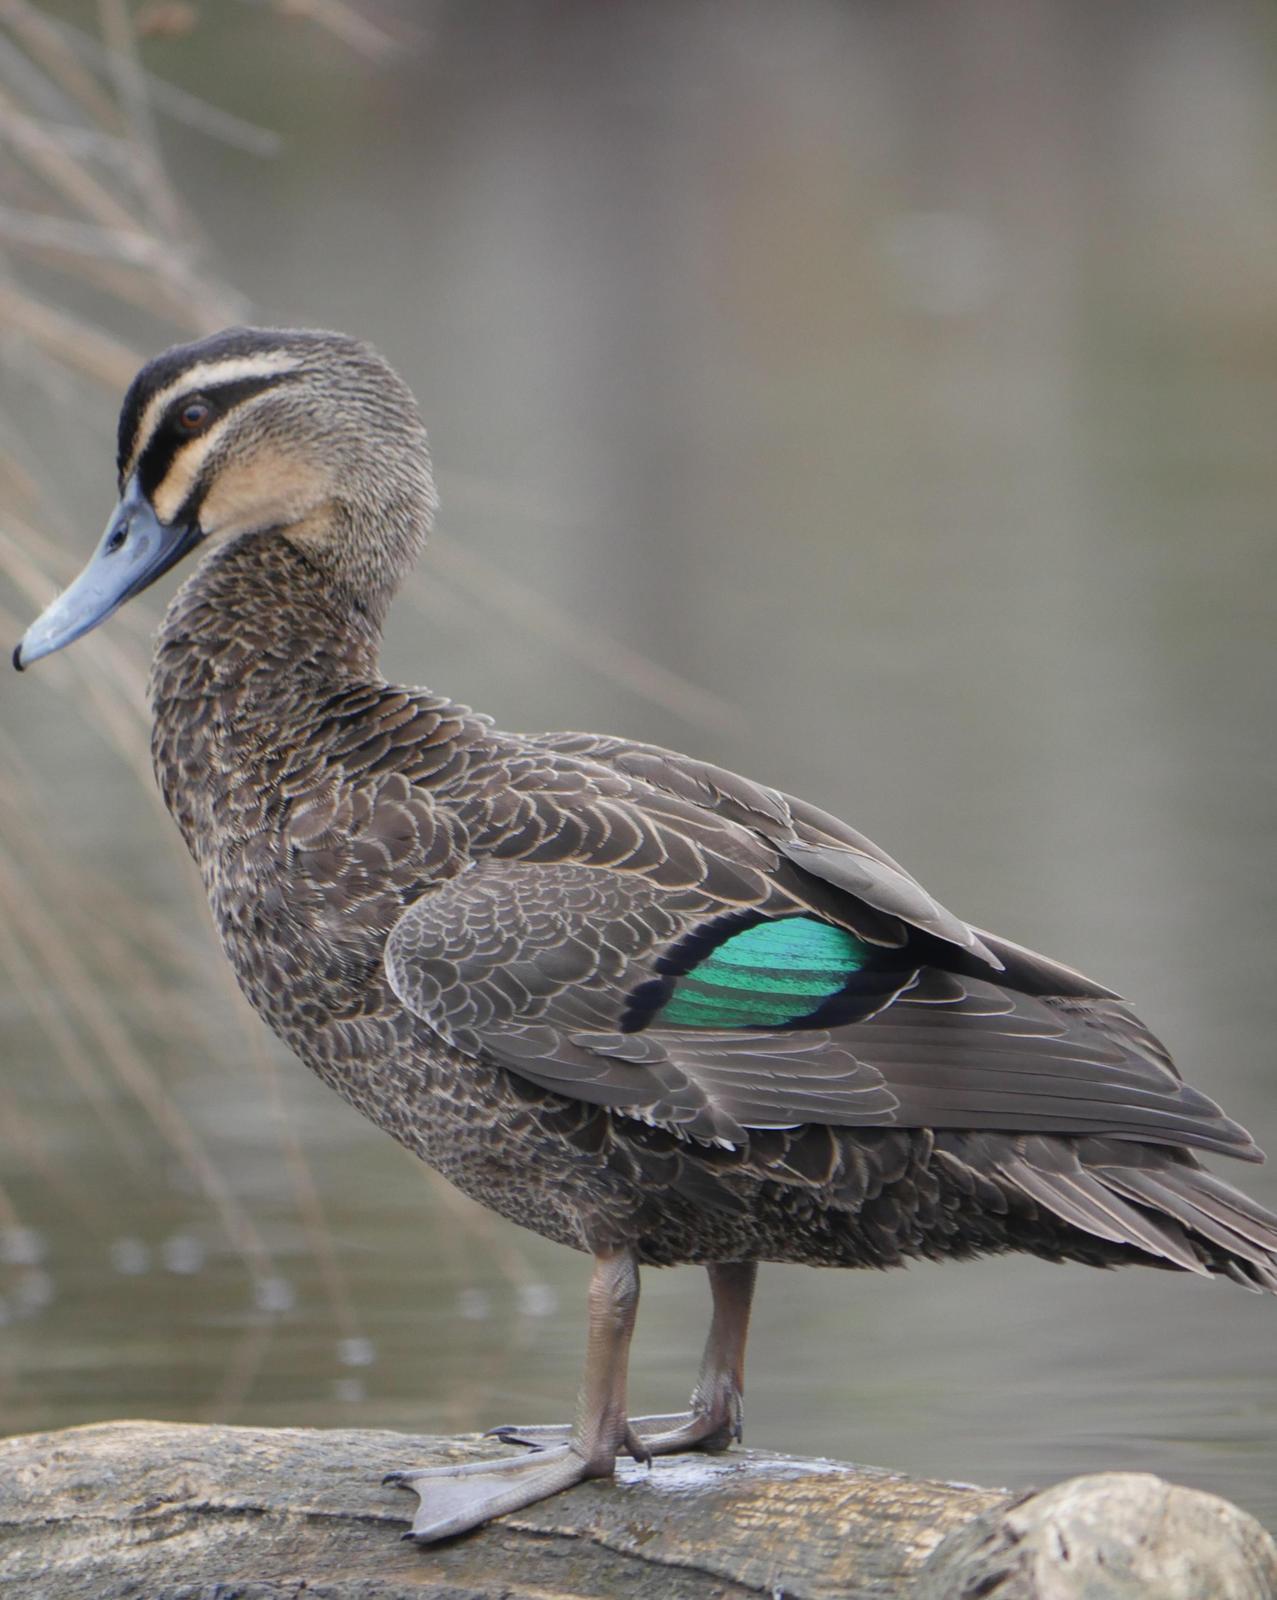 Pacific Black Duck Photo by Peter Lowe